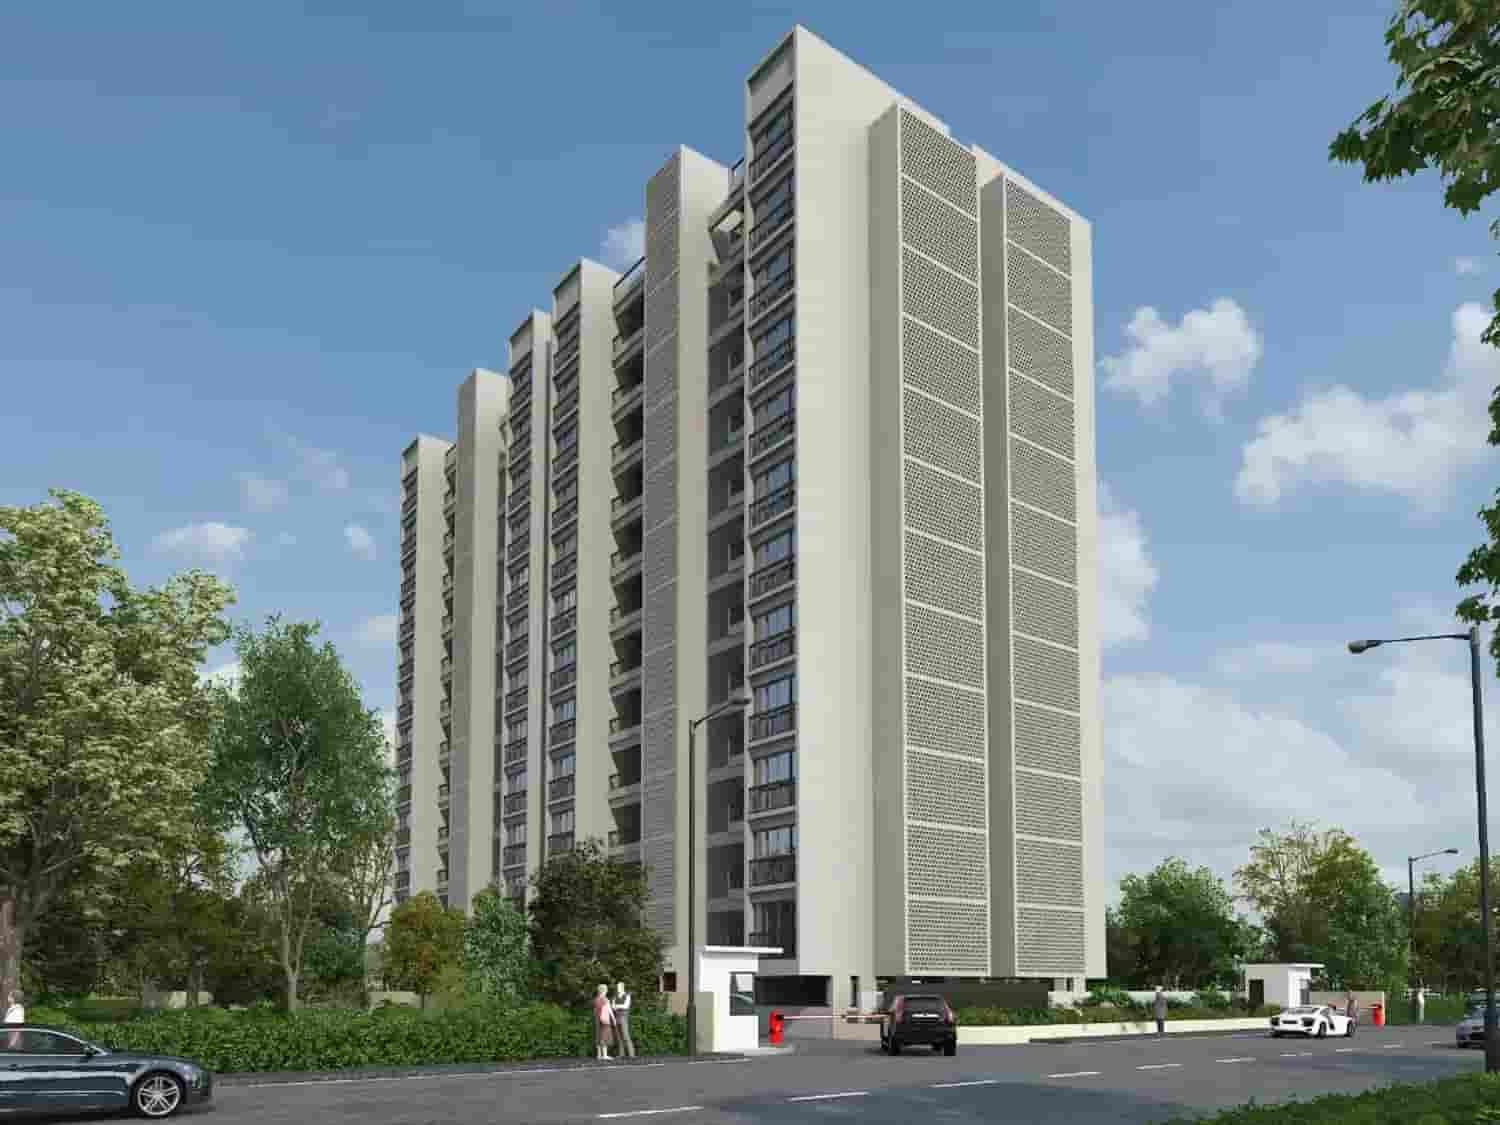 Solitaire Homes Pune